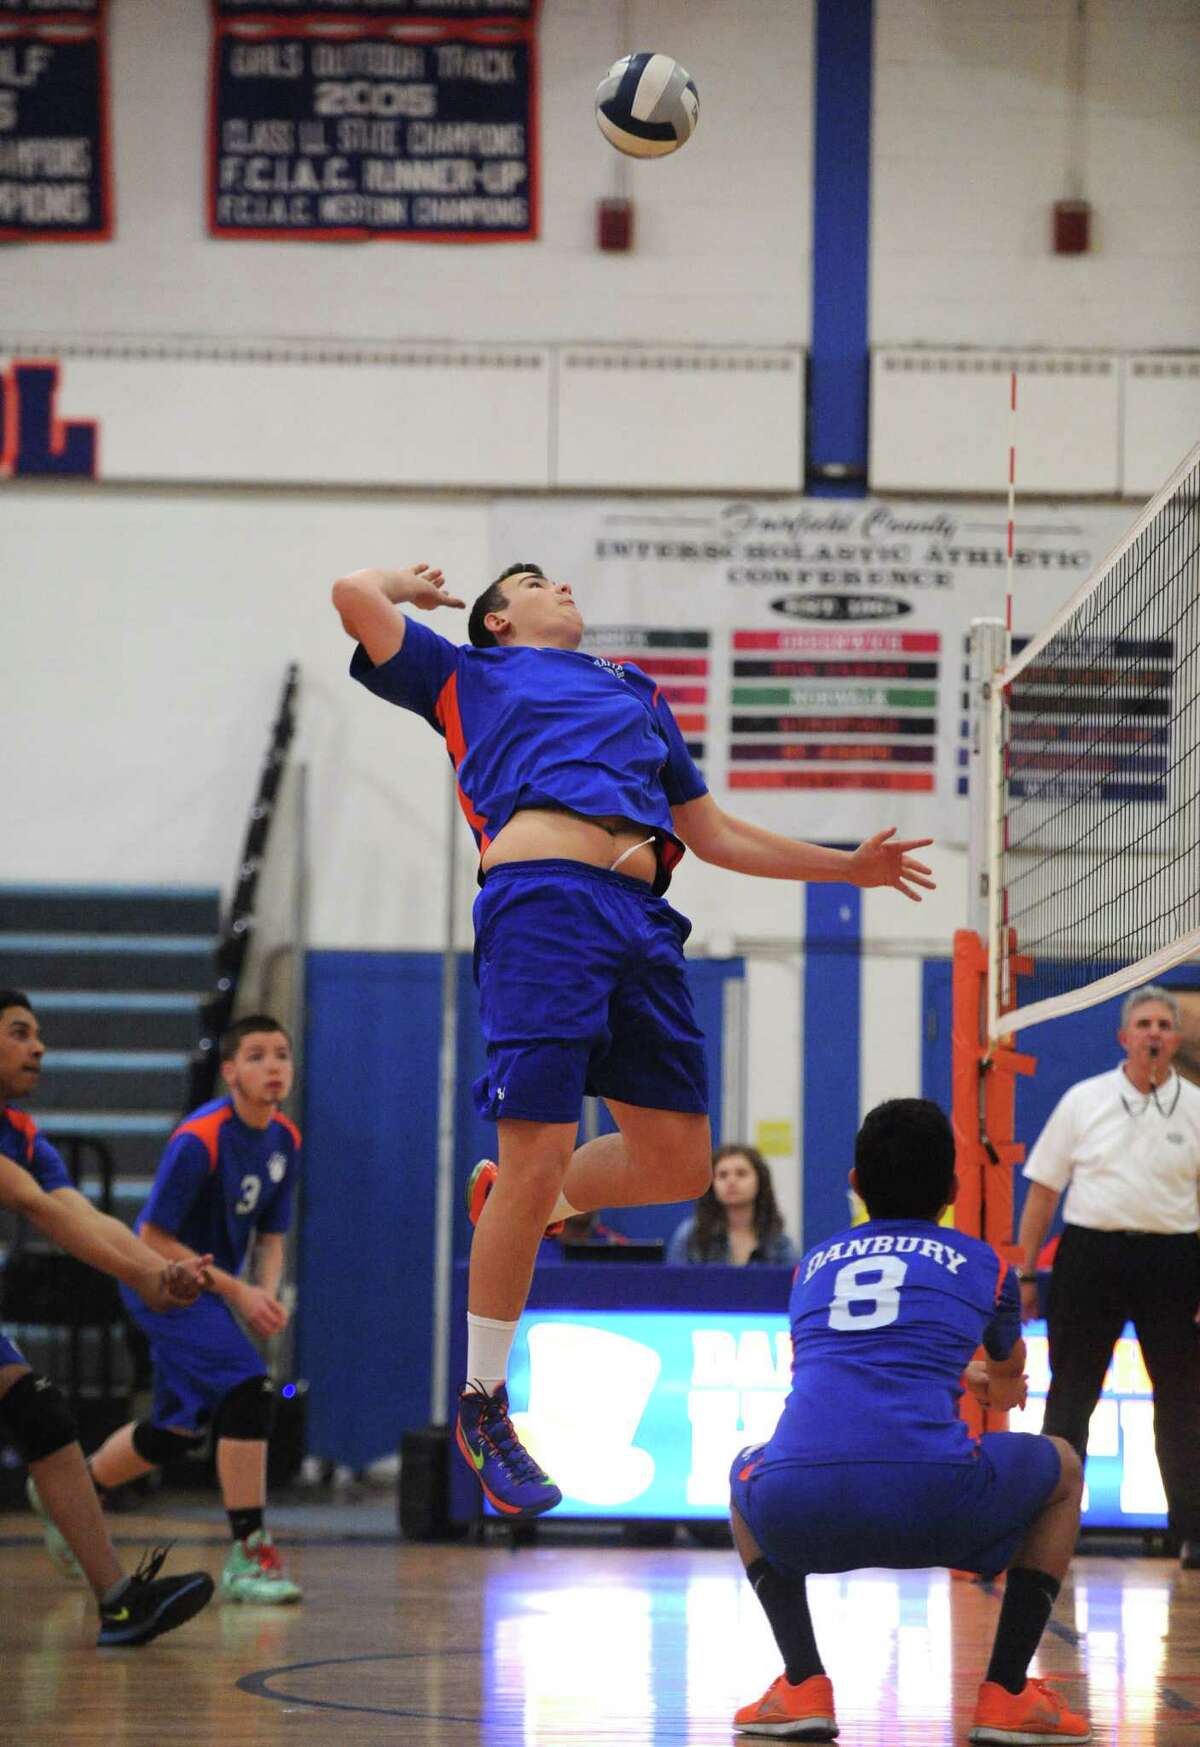 Danbury's Owen Smith spikes the ball after a set by teammate Alex Cardenas, right, in Danbury's 3-1 win over Greenwich at Danbury High School in Danbury, Conn. Friday, May 2, 2014.